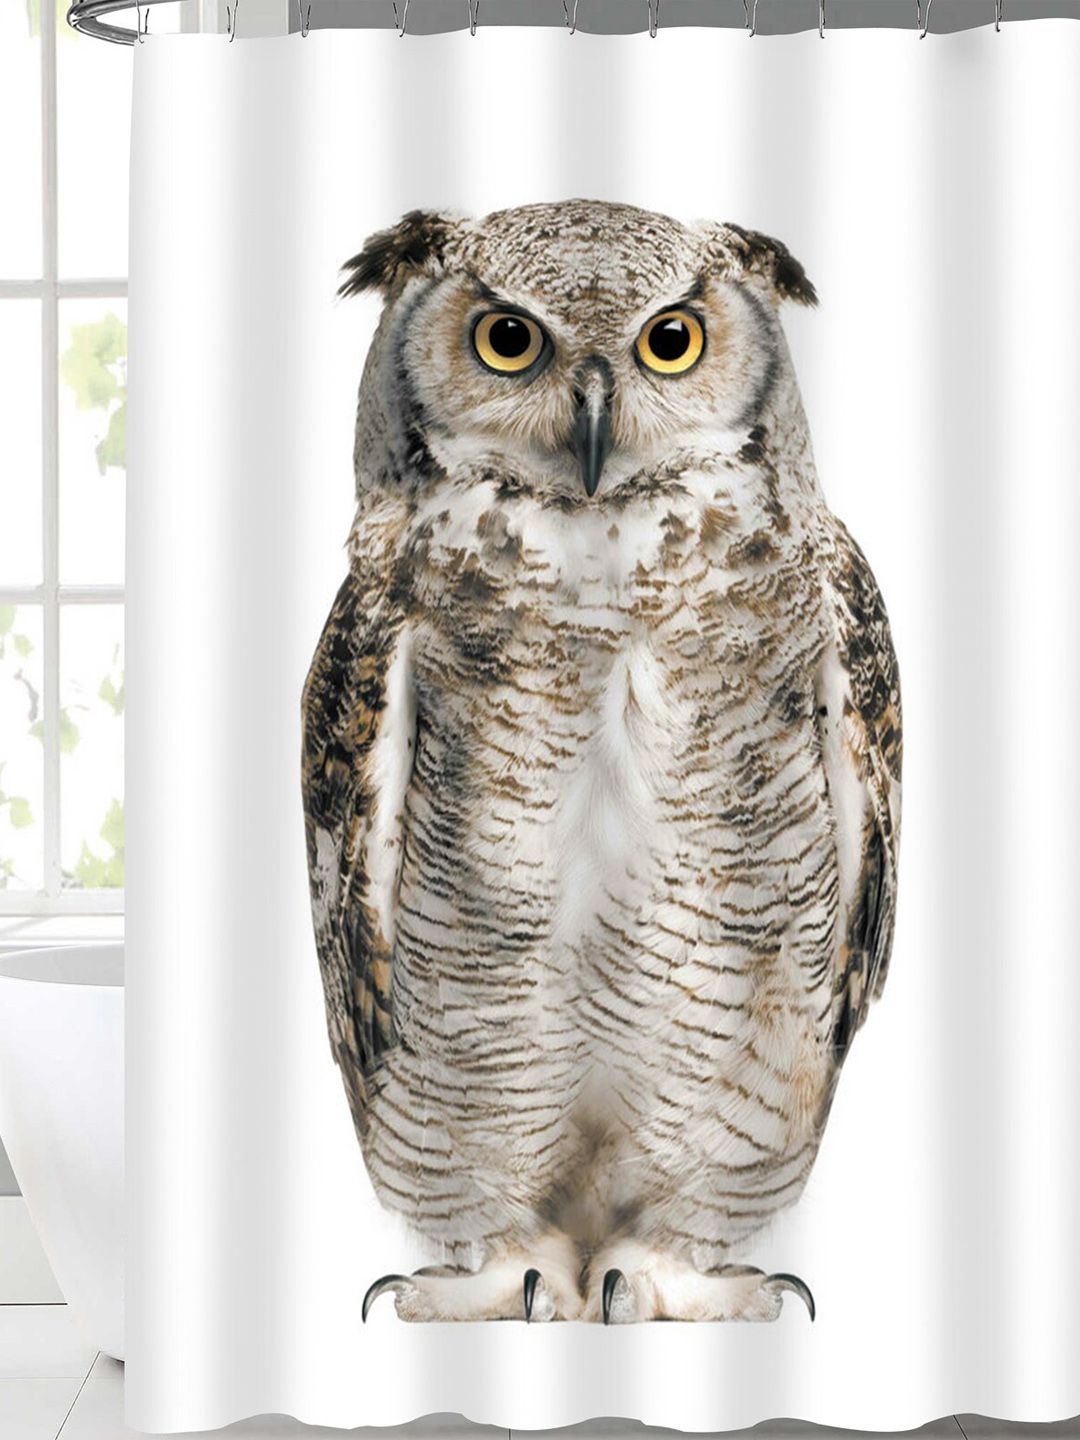 Lushomes White & Beige Digital Owl Printed Shower Curtain Price in India